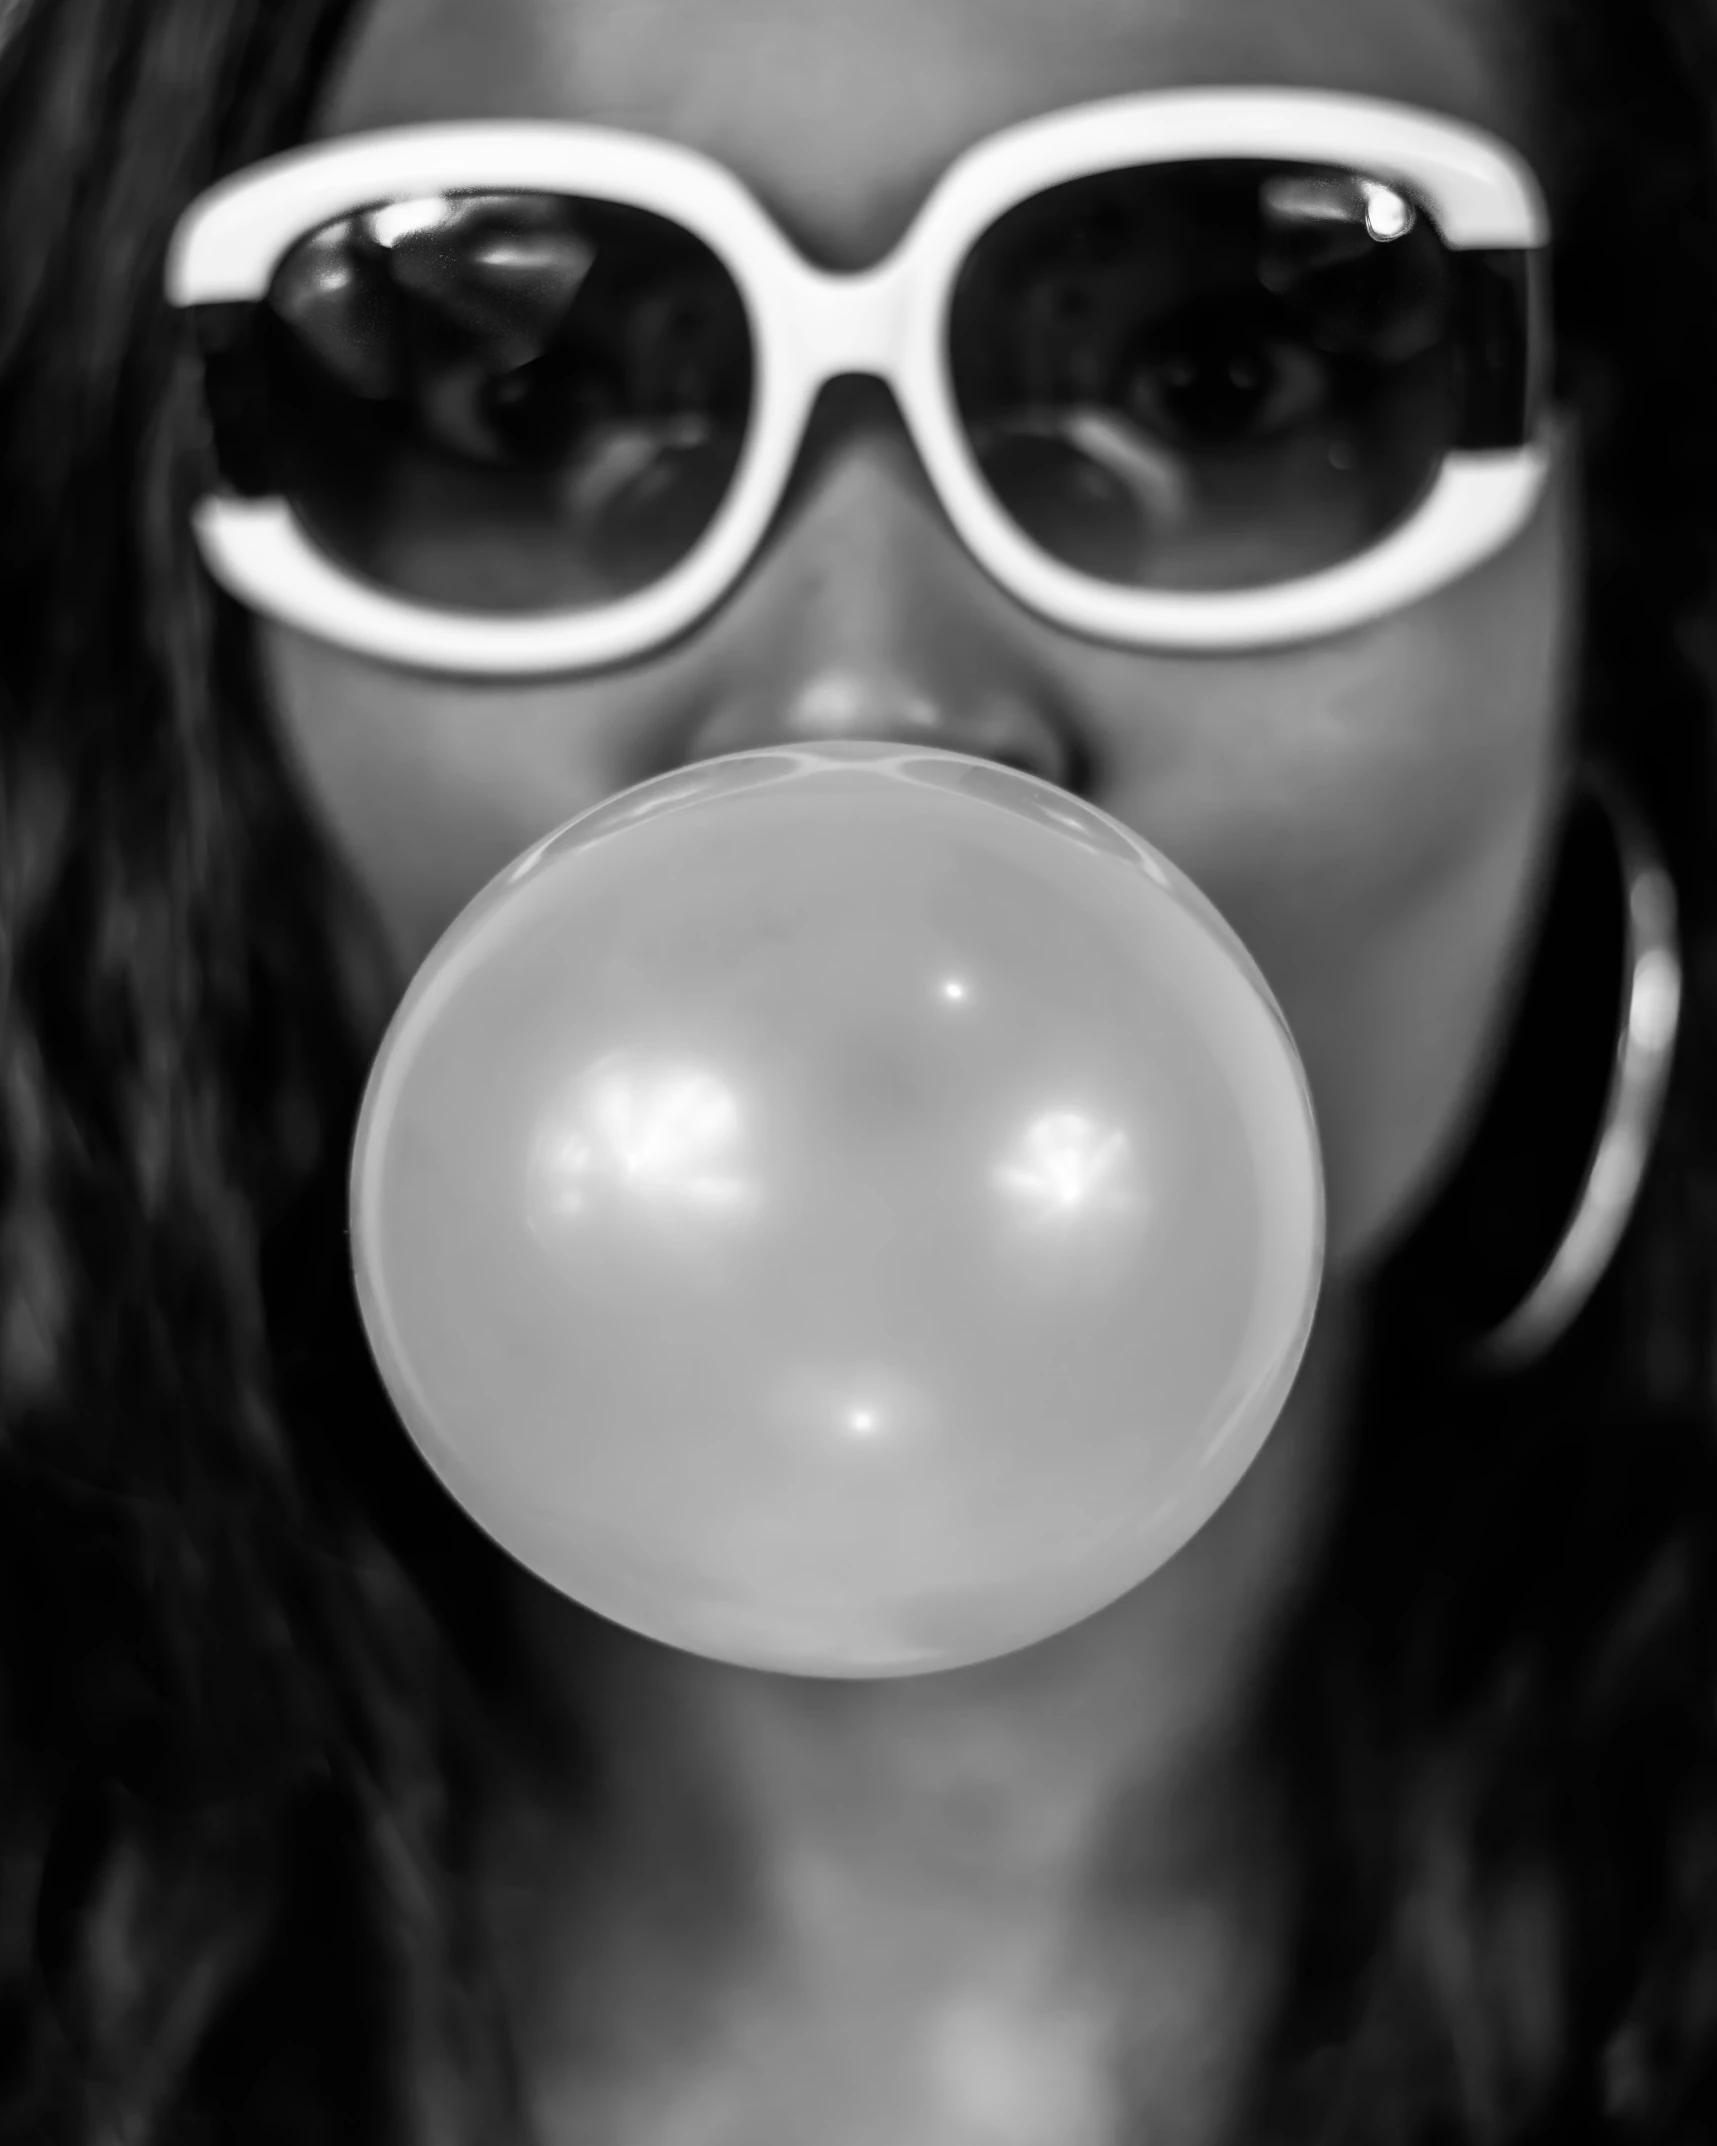 a woman wearing round sunglasses blowing bubbles from her nose